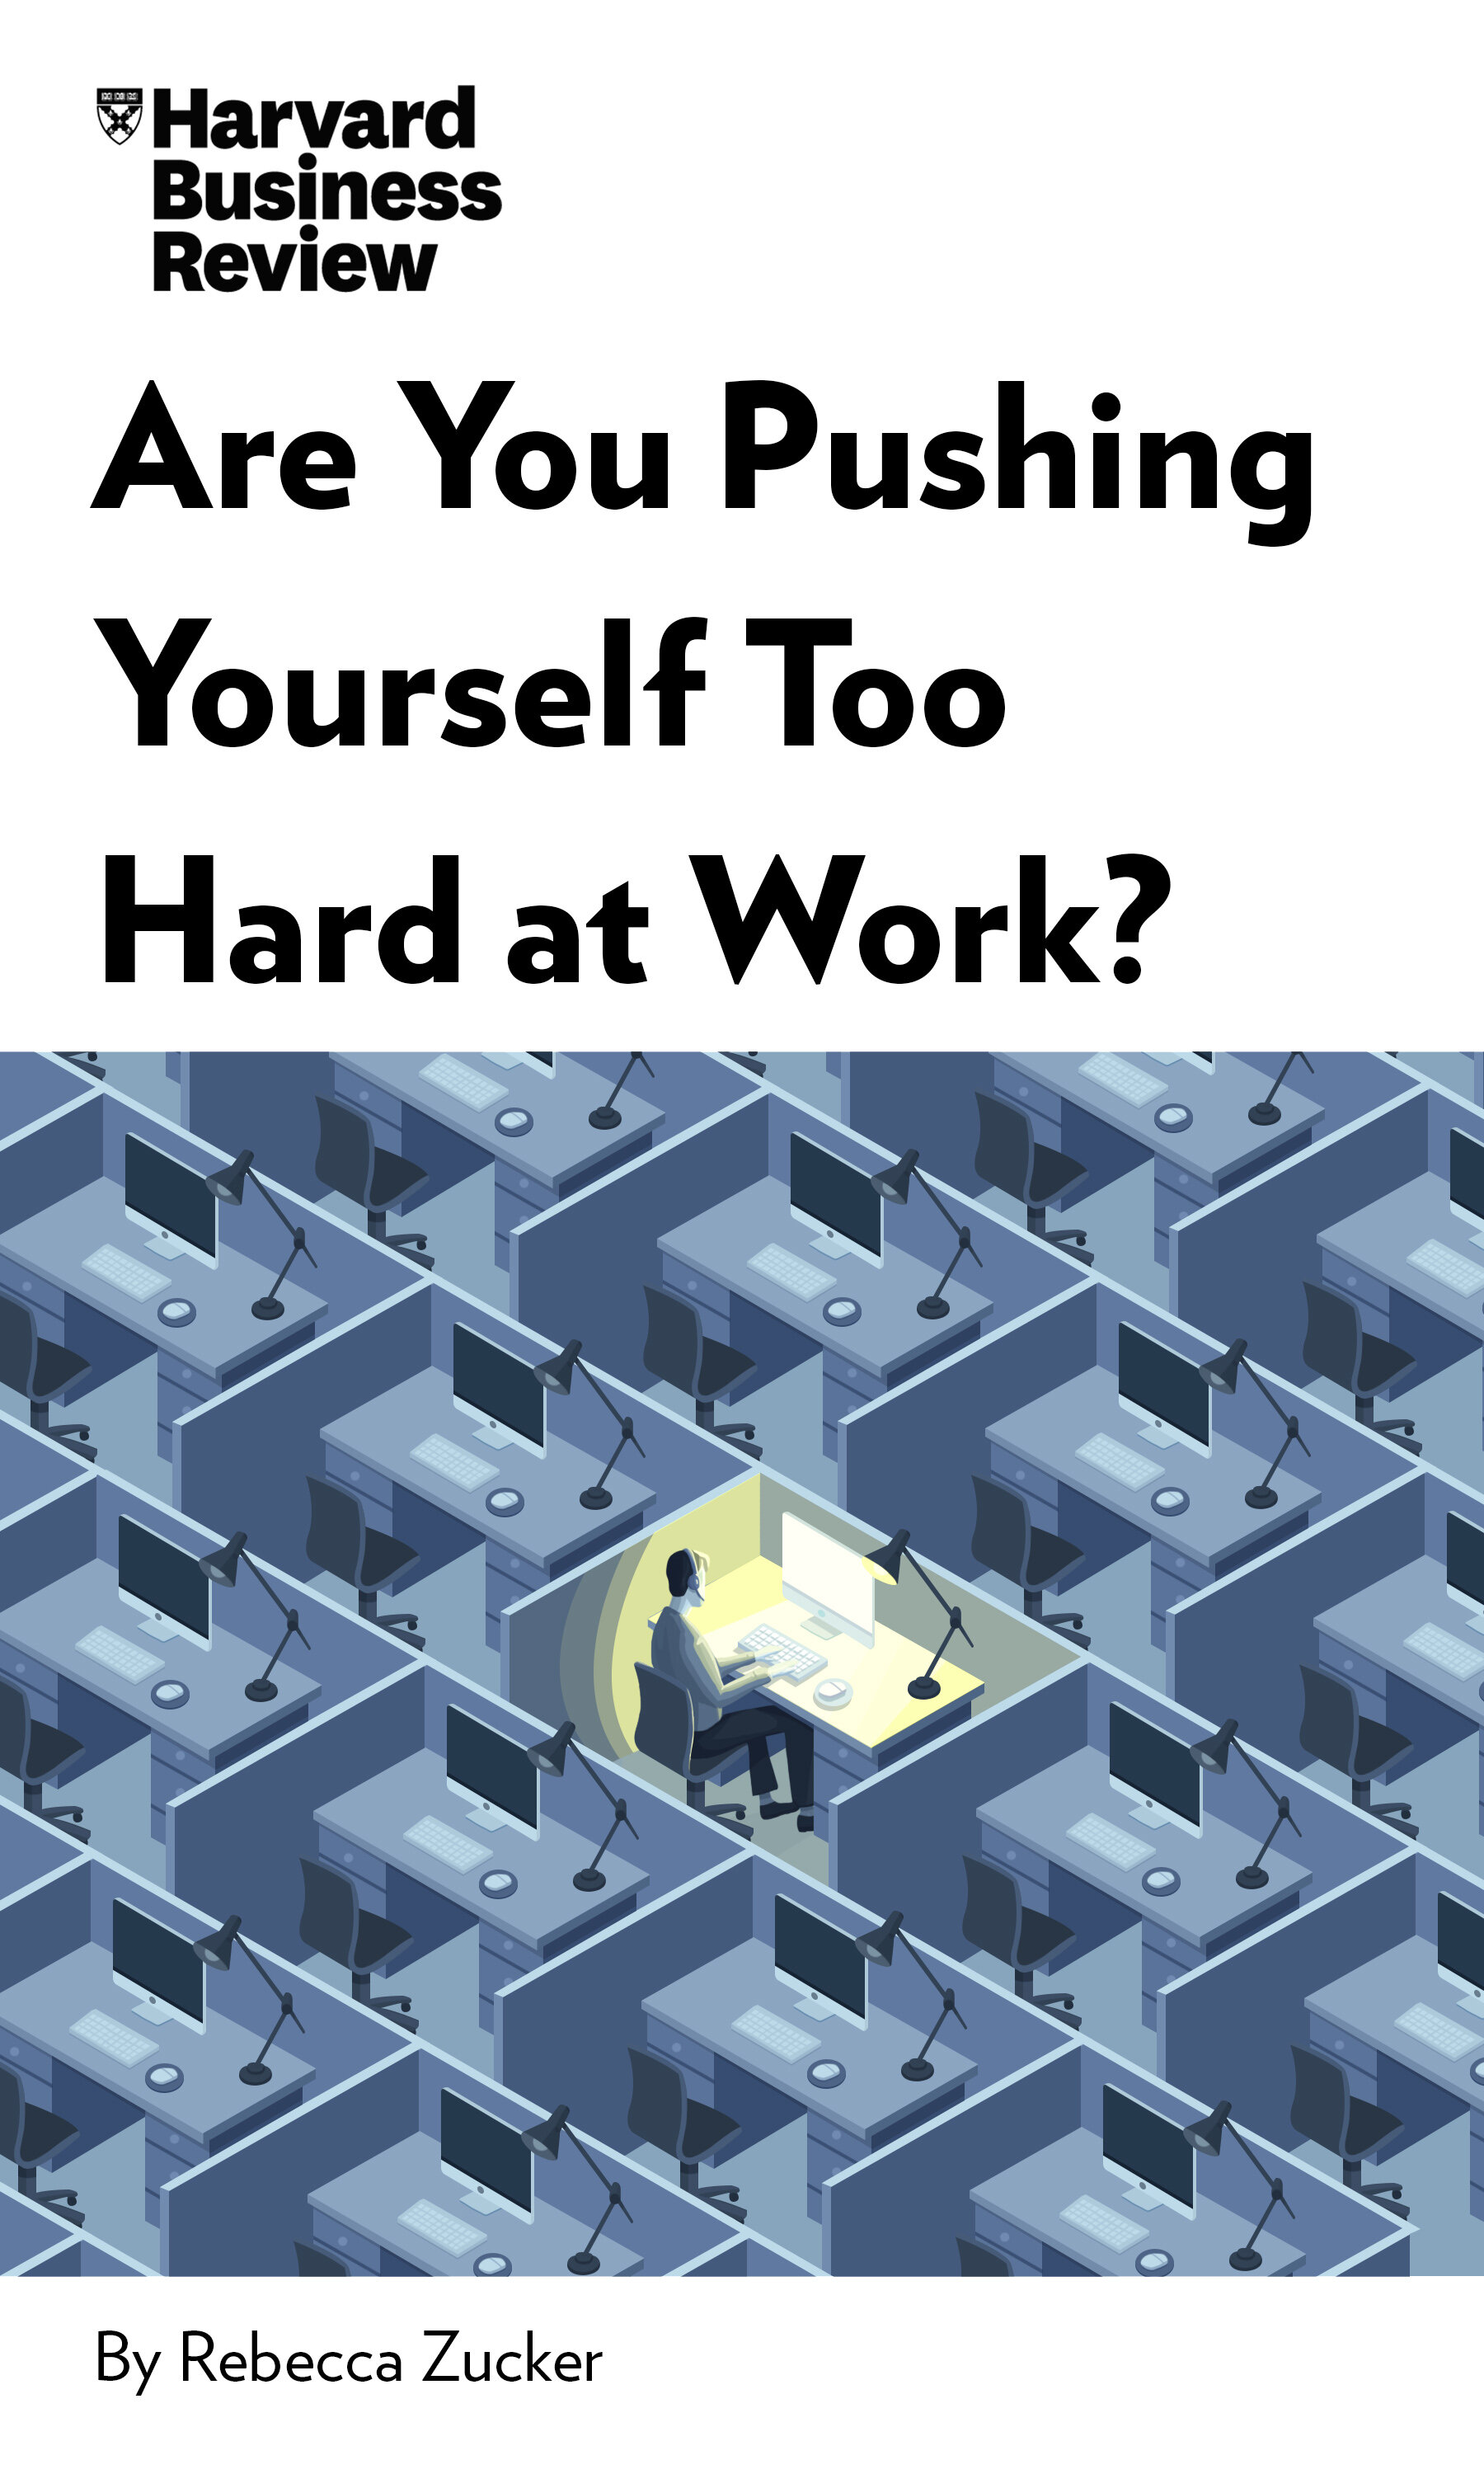 Are-You-Pushing-Yourself-Too-Hard-at-Work-eBook.jpg